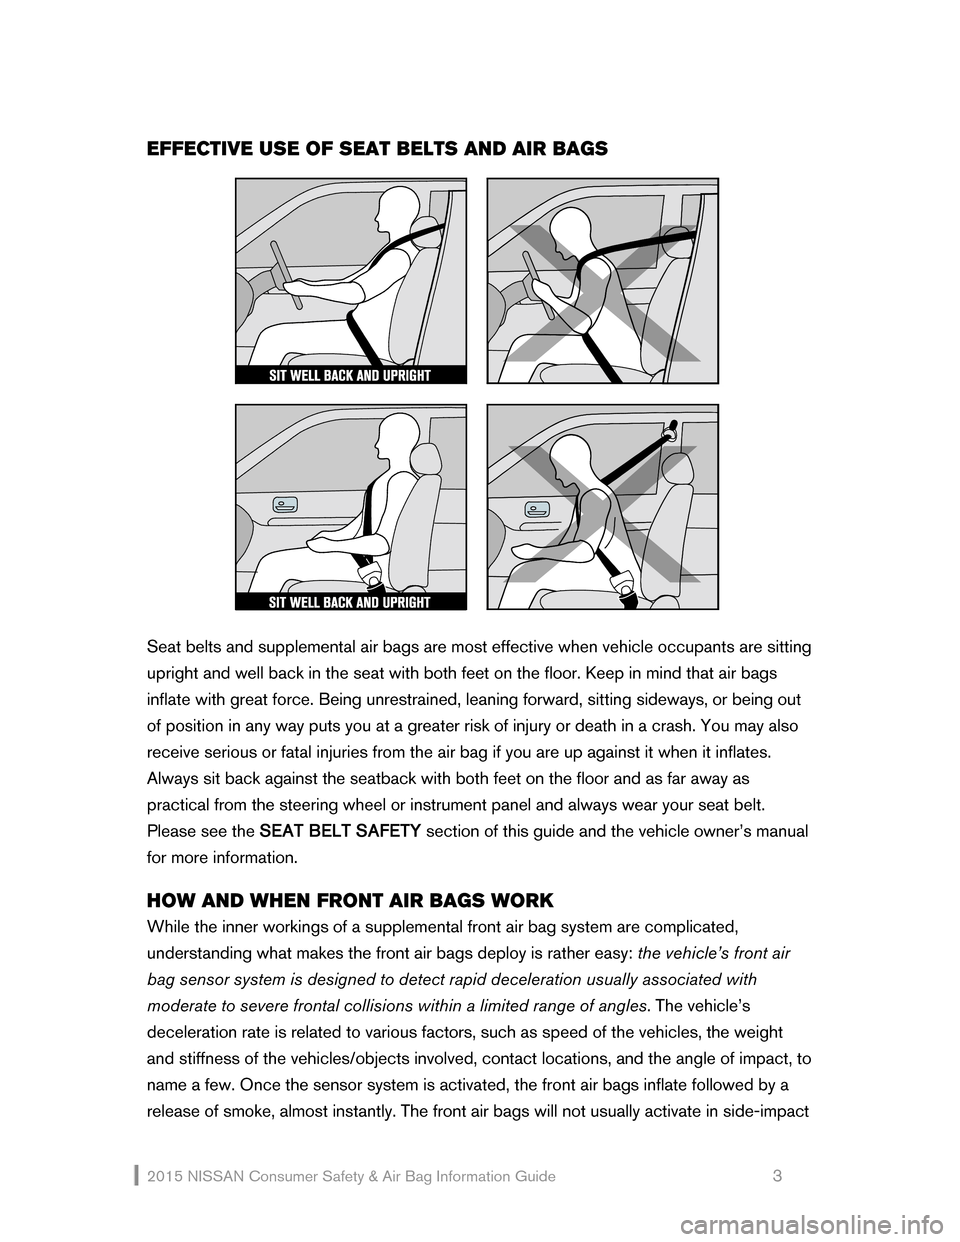 NISSAN ROGUE 2015 2.G Consumer Safety Air Bag Information Guide 2015 NI\f\fAN  Consumer \fafety  & Air Bag Information Guide                                                     \b 
EFFE\fTIVE USE OF SEAT BELTS AND AIR BAGS 
 
 
 
\feat belts and supplemental air b